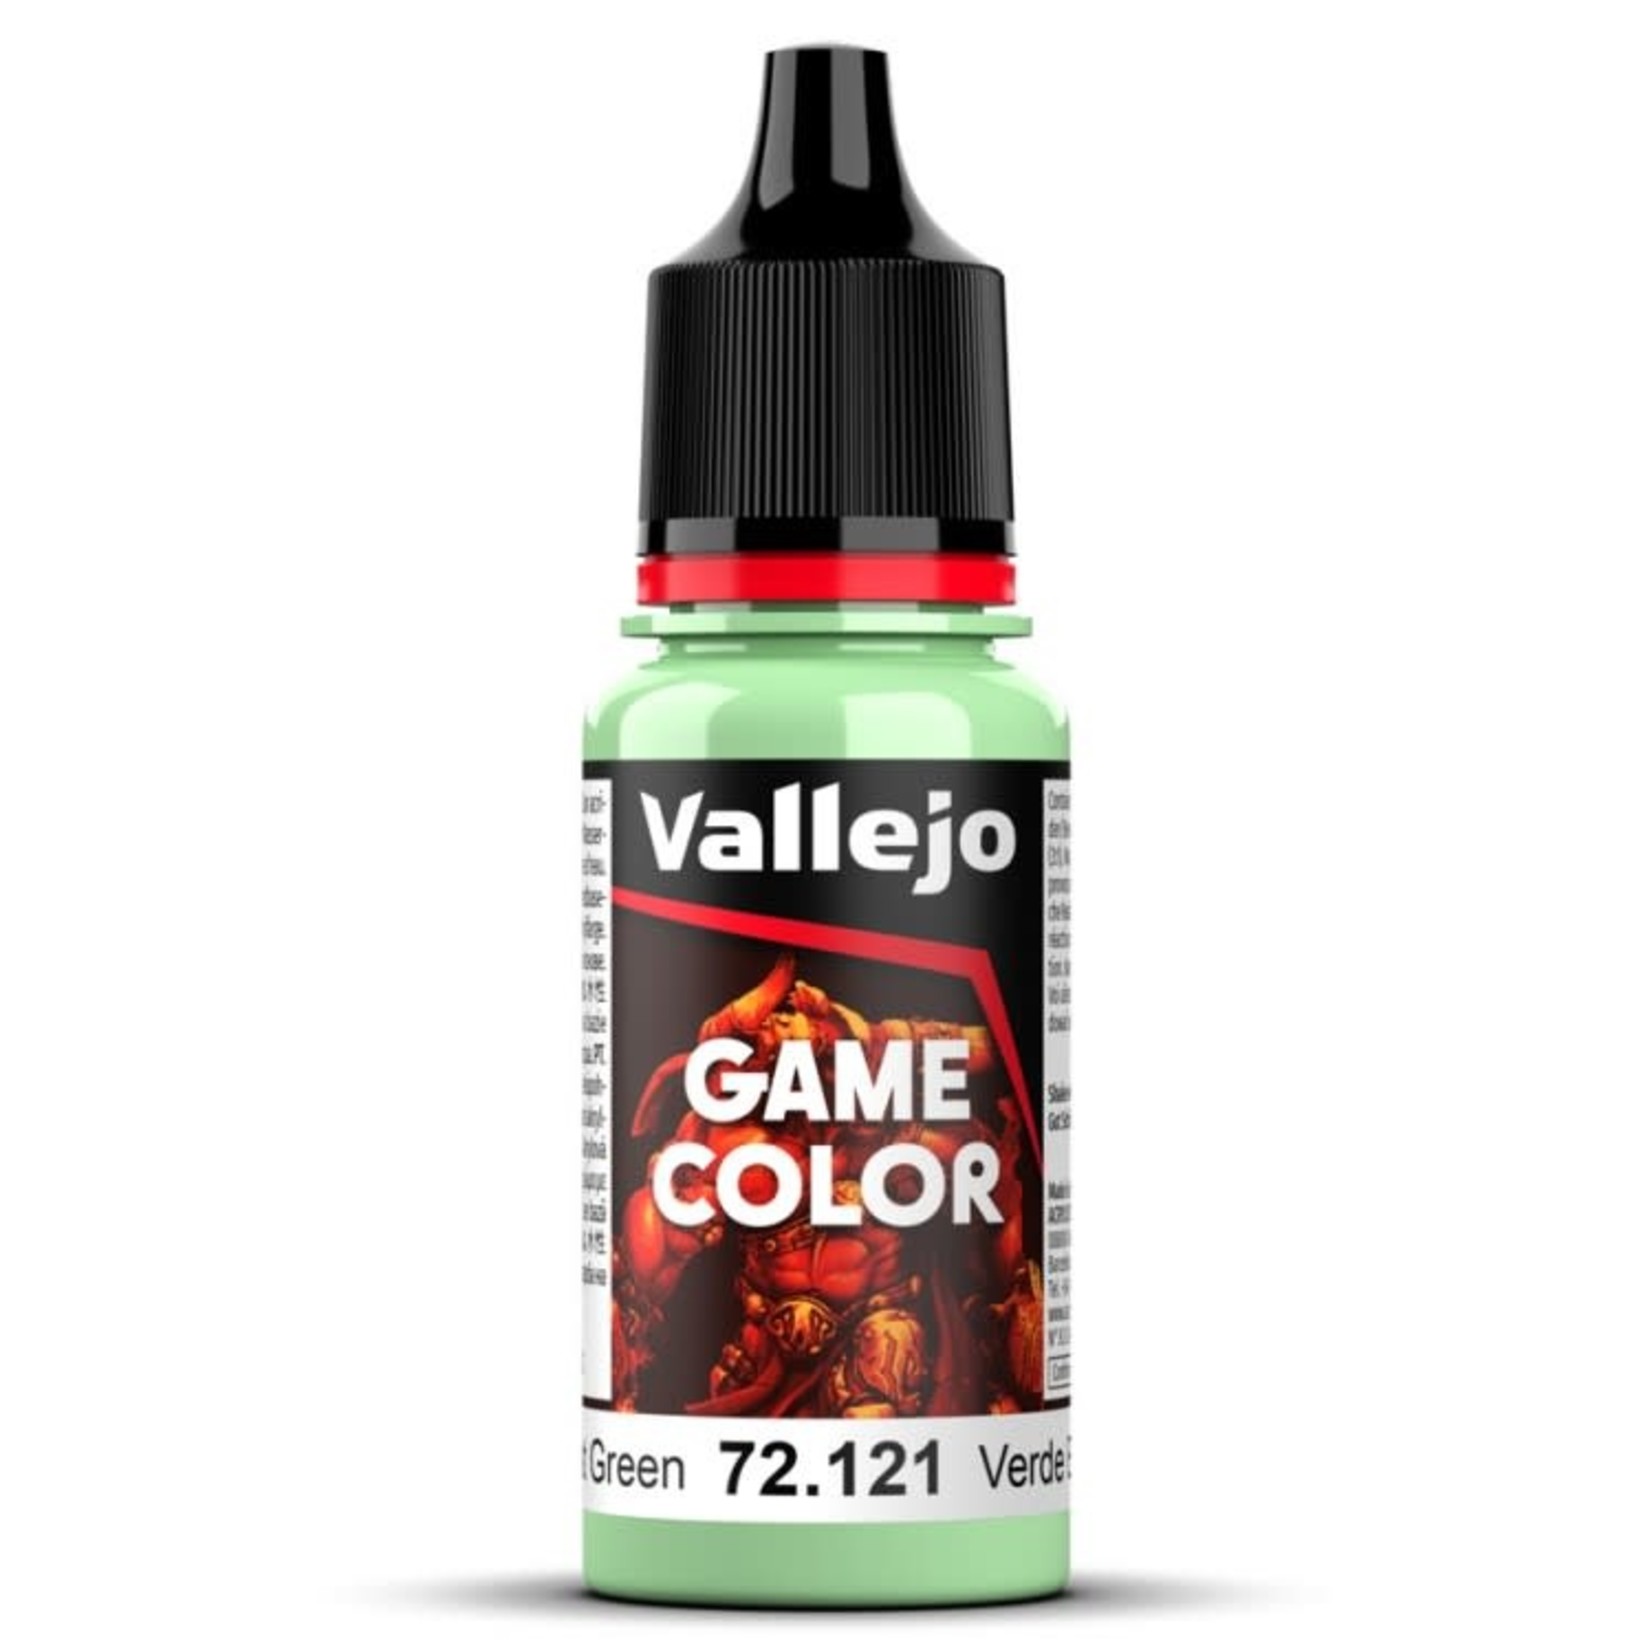 Vallejo Paint: Game Color (Ghost Green)